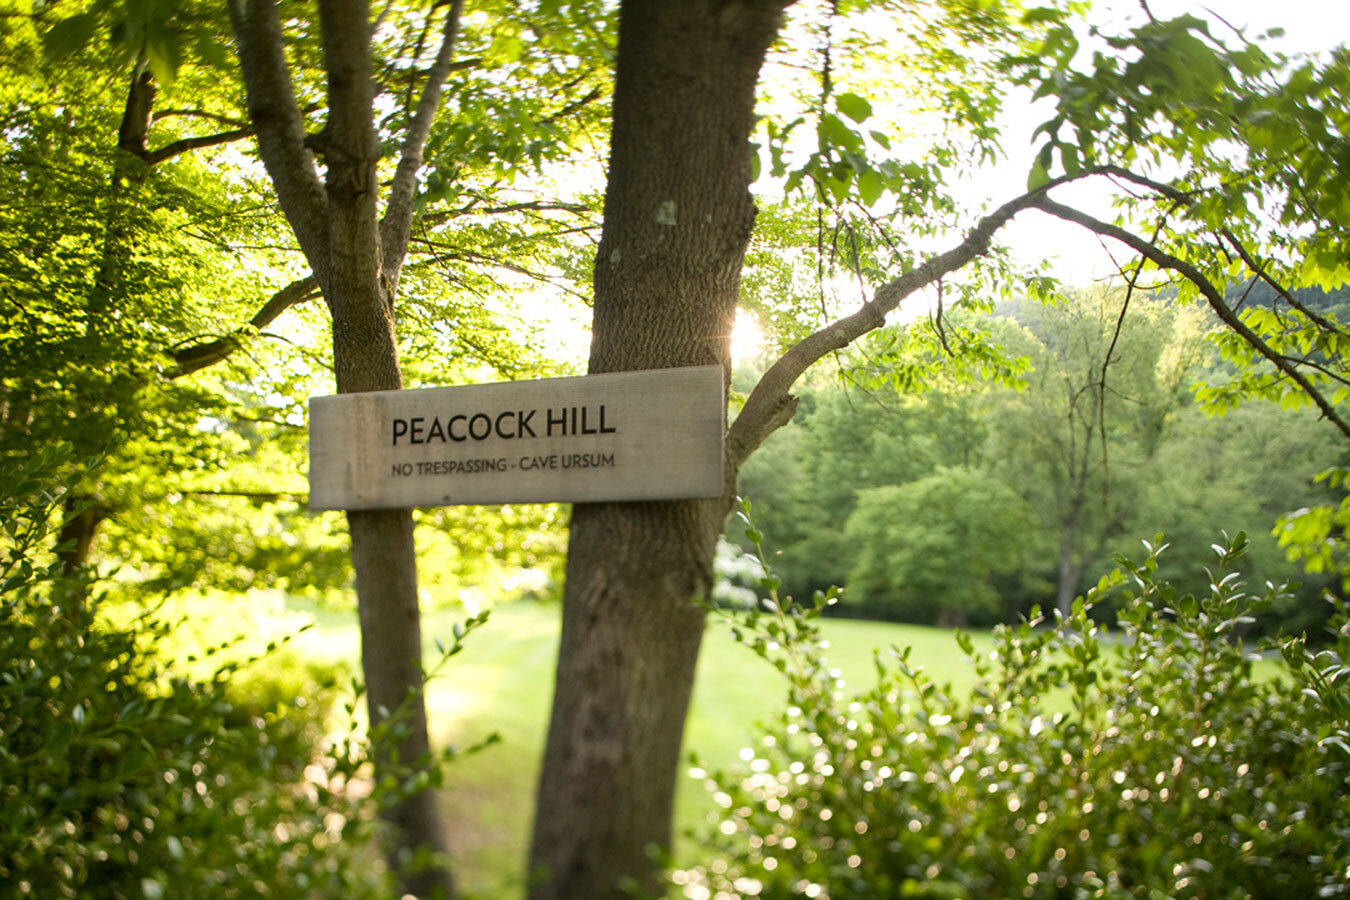  Peacock Hill Residence - Peacock Hill 